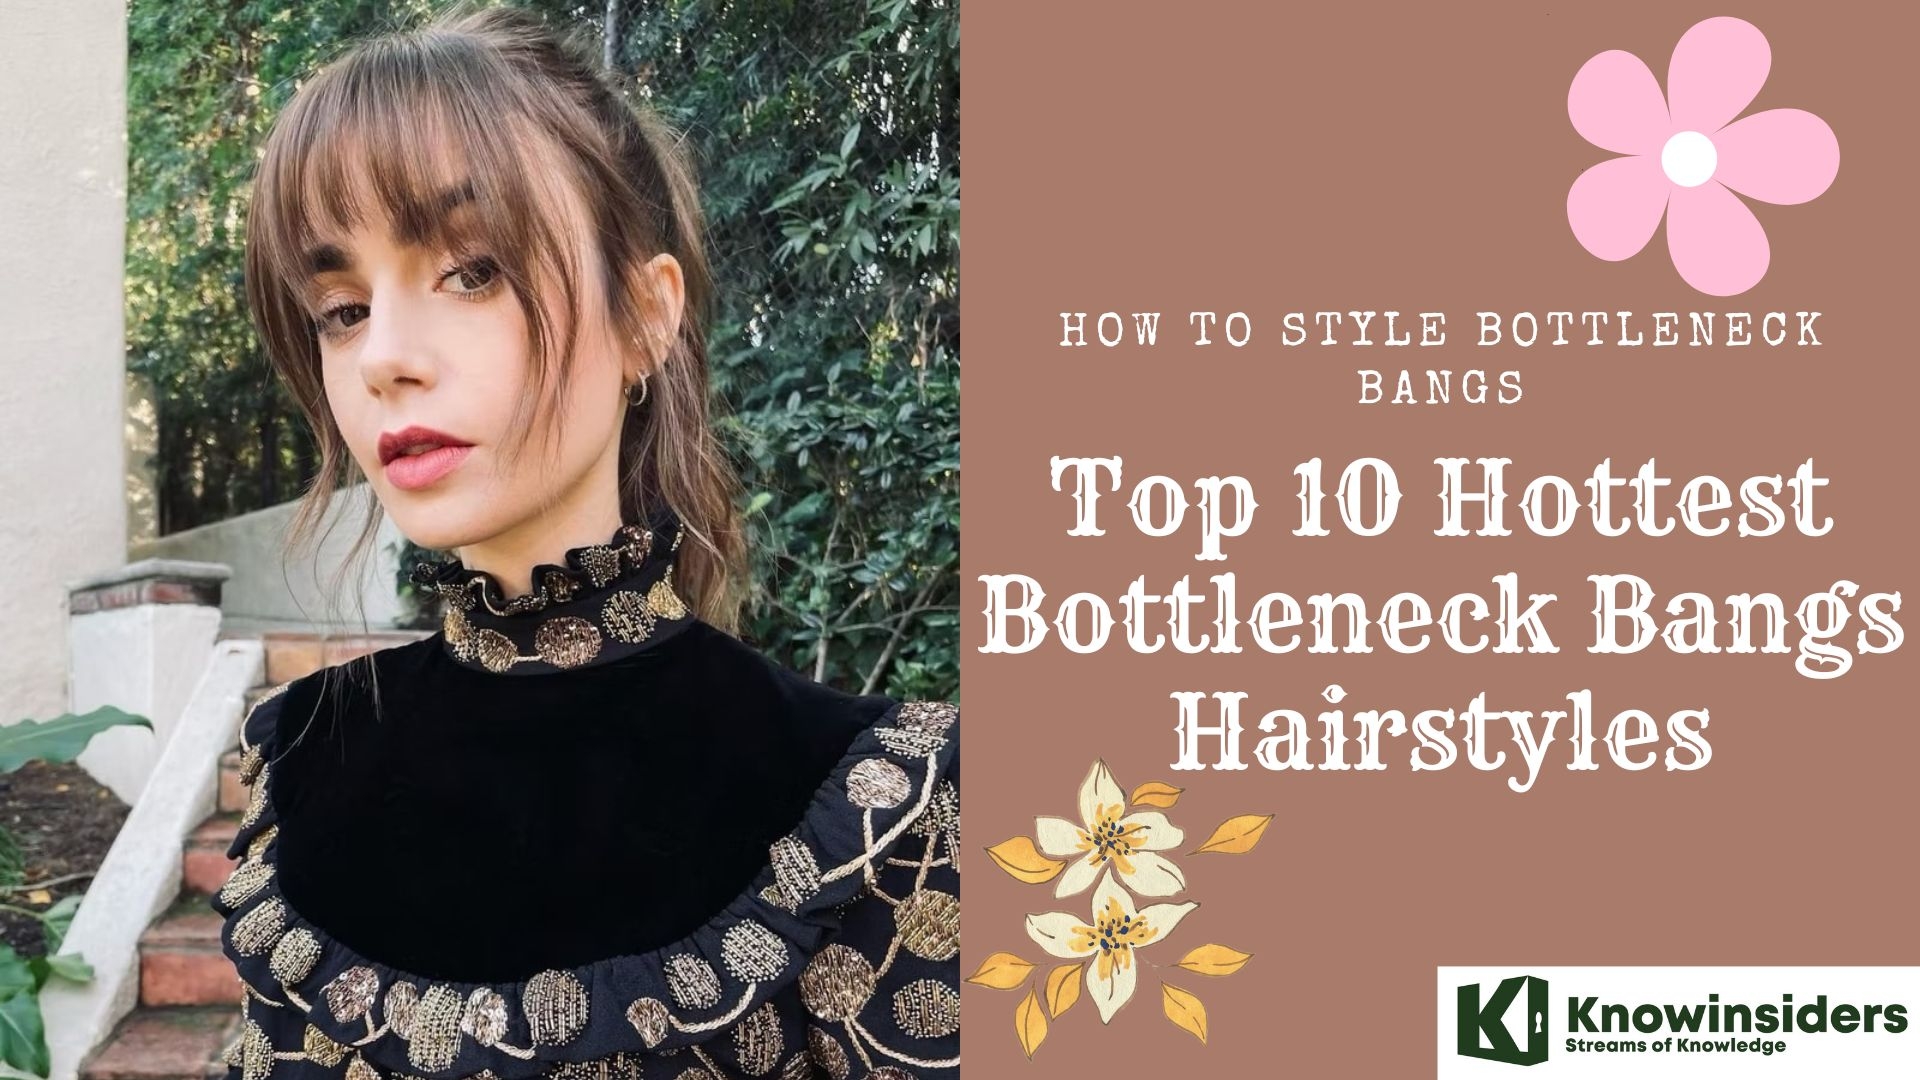 How To Style Bottleneck Bangs Haircut: Top 10 Hottest Bottleneck Bangs Hairstyles Knowinsiders.com 